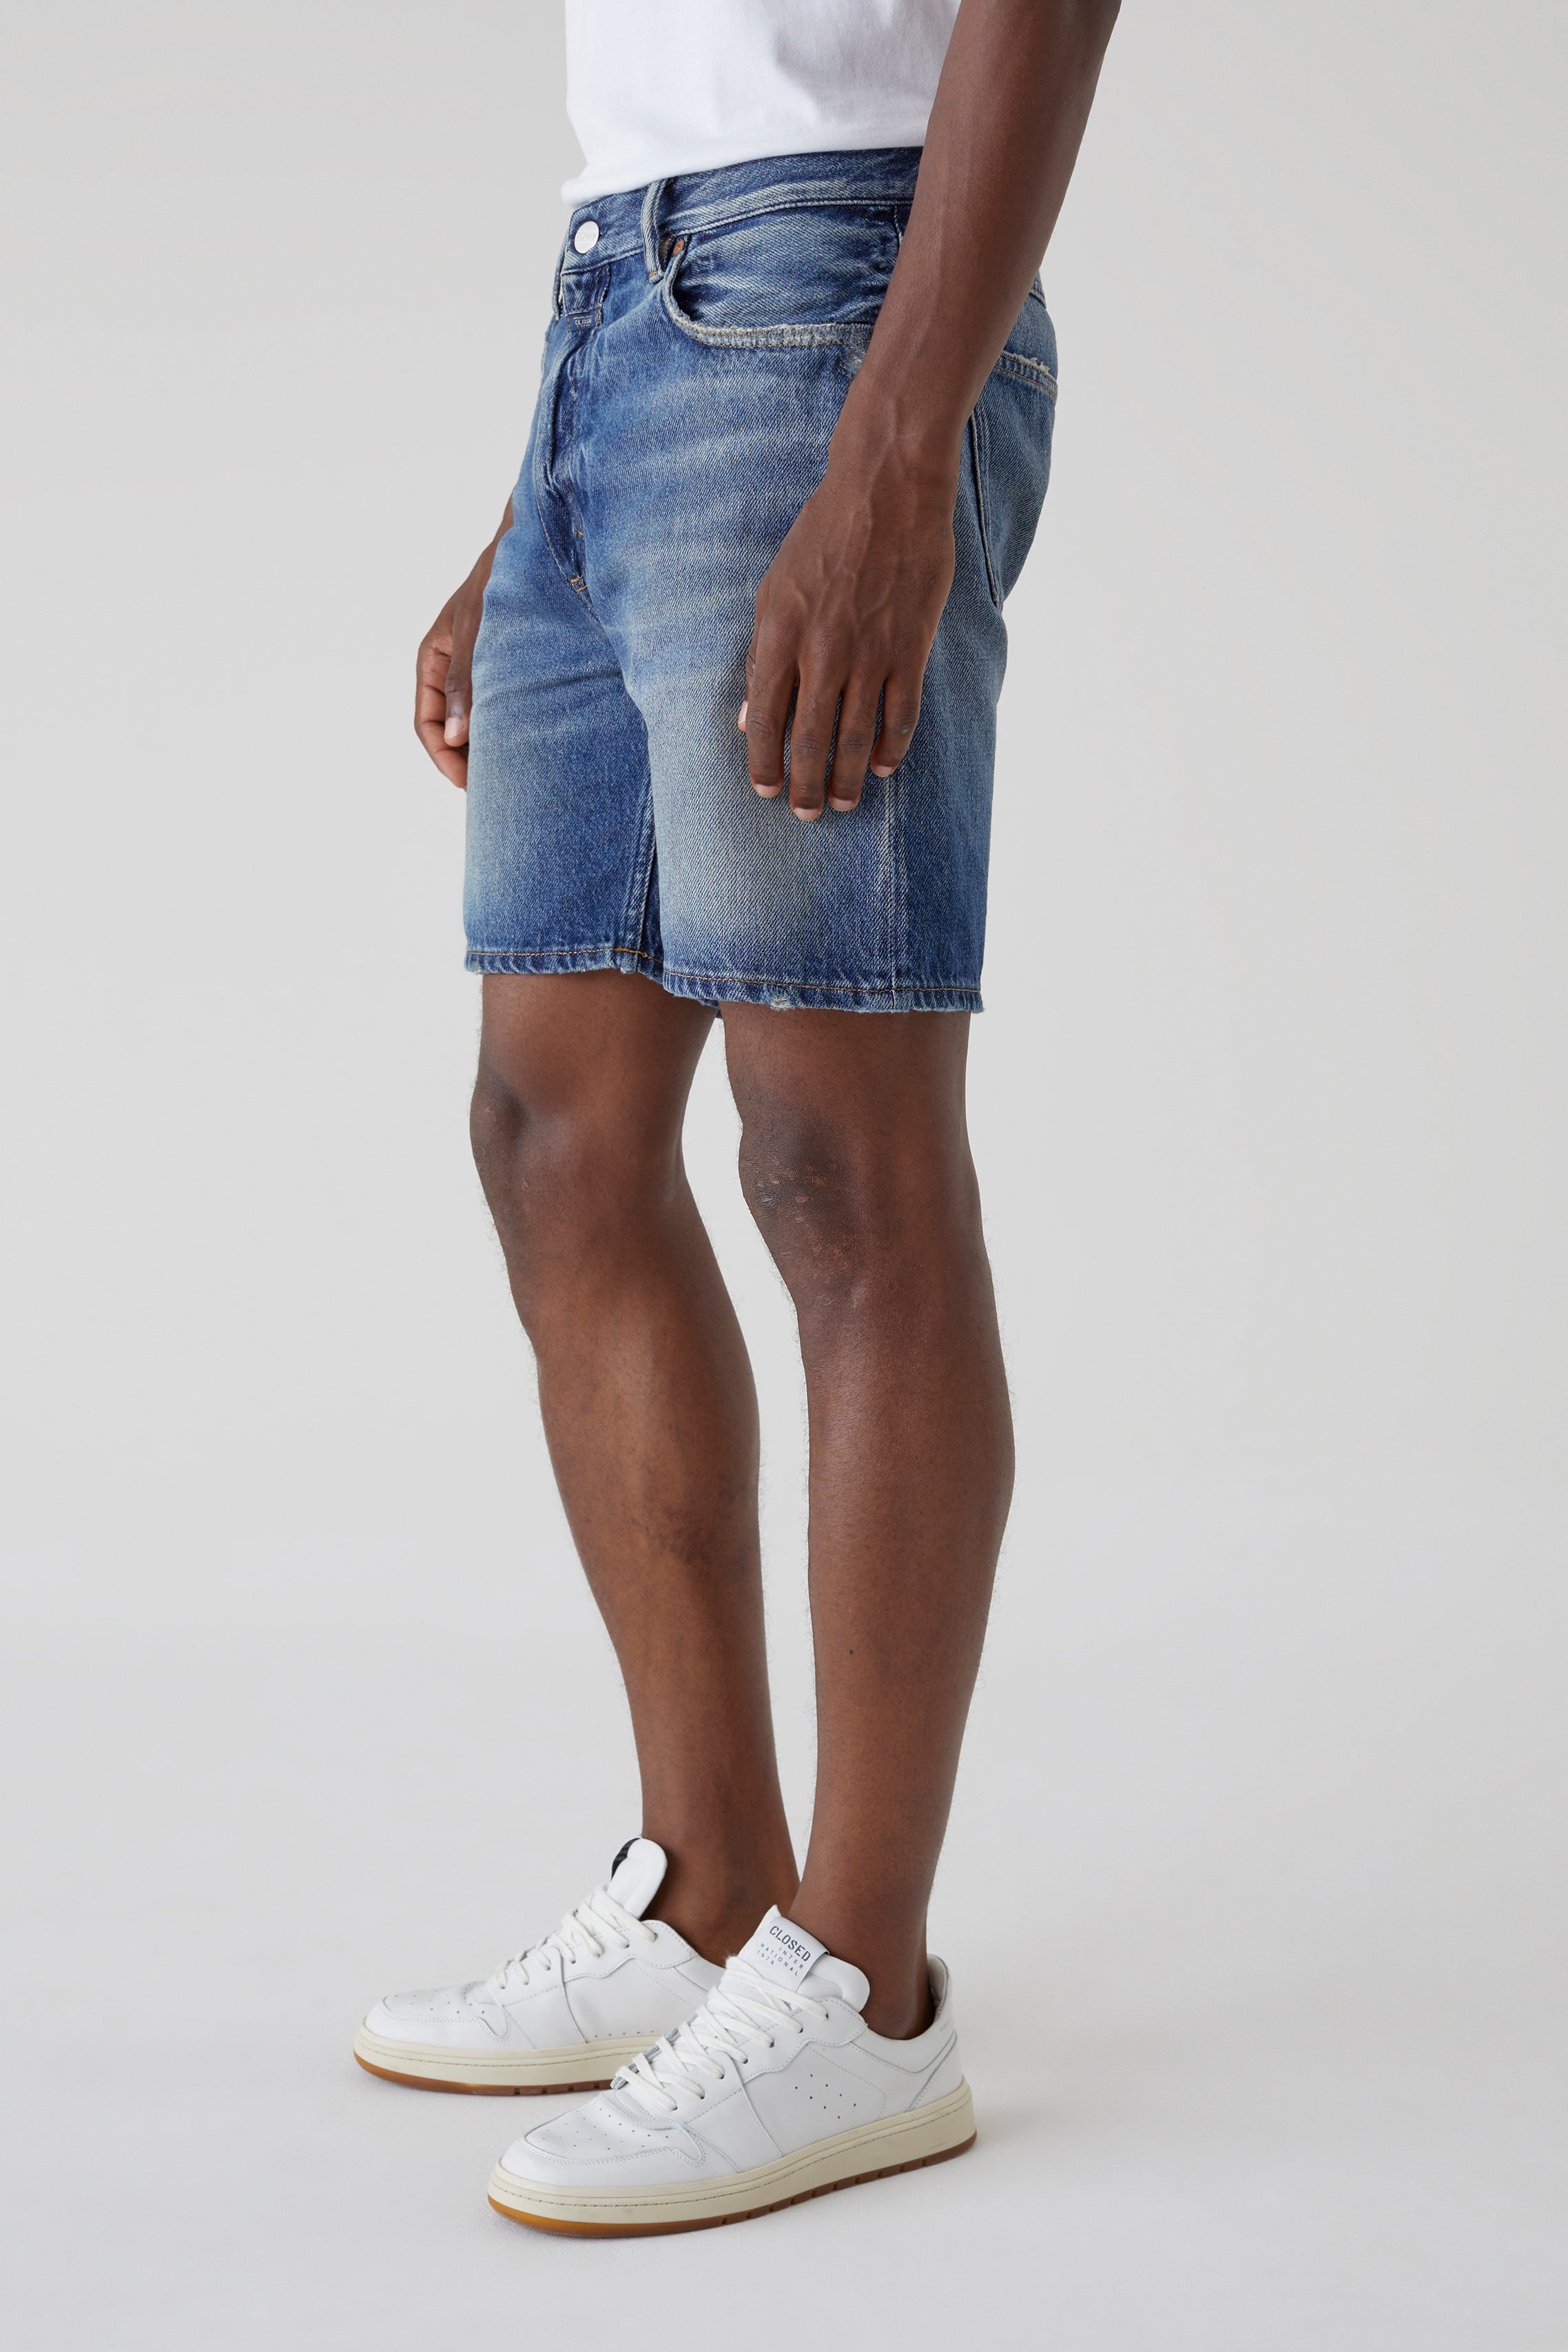 CLOSED-OUTLET-SALE-STYLE-NAME-BOGUS-SHORTS-Hosen-ARCHIVE-COLLECTION-3_ed6a736c-a15b-471b-8090-884af52b2cb9.jpg